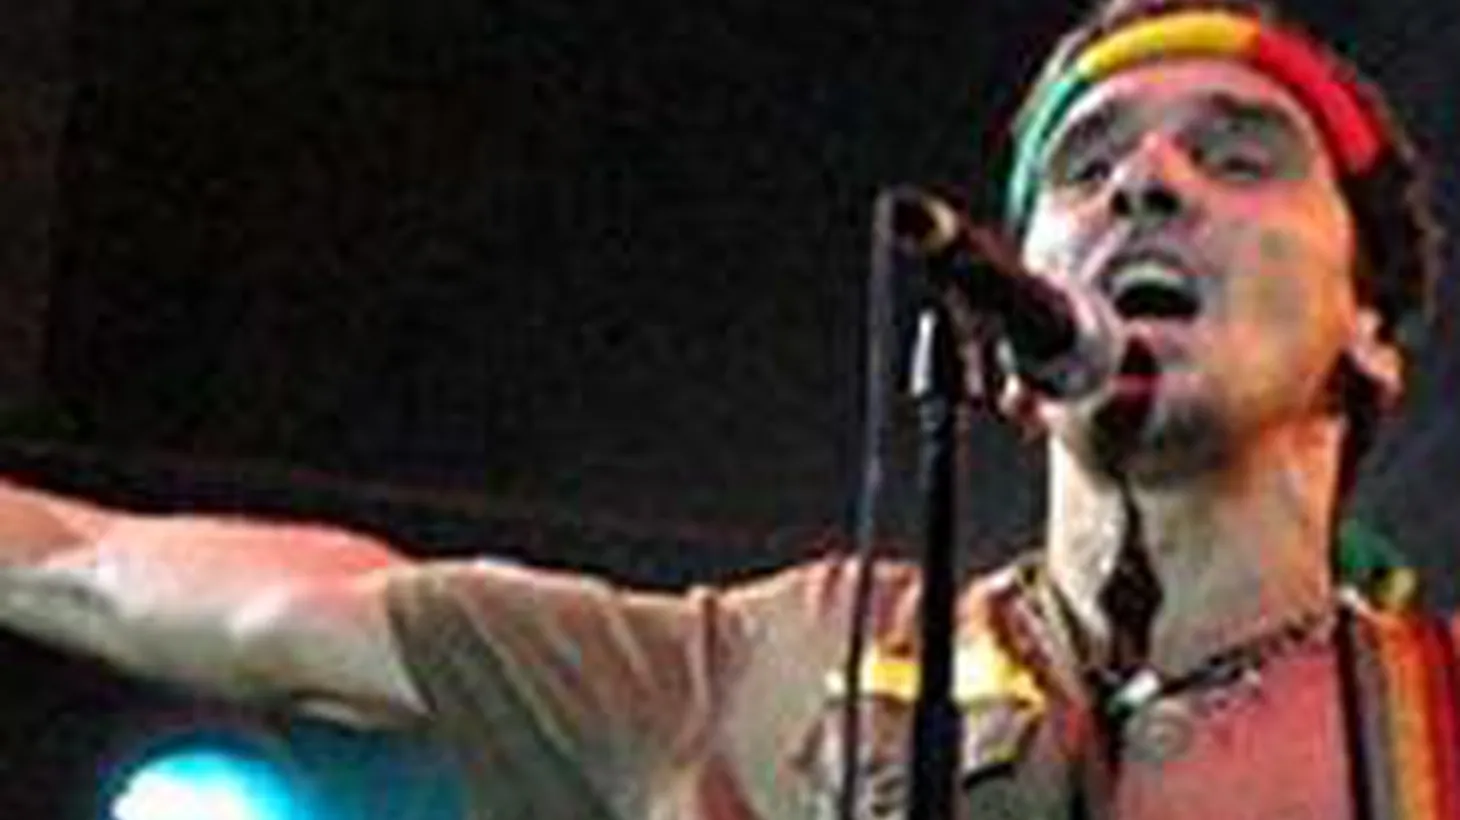 Latin Alternative godfather, Manu Chao, performs new songs for Morning Becomes Eclectic at 11am.